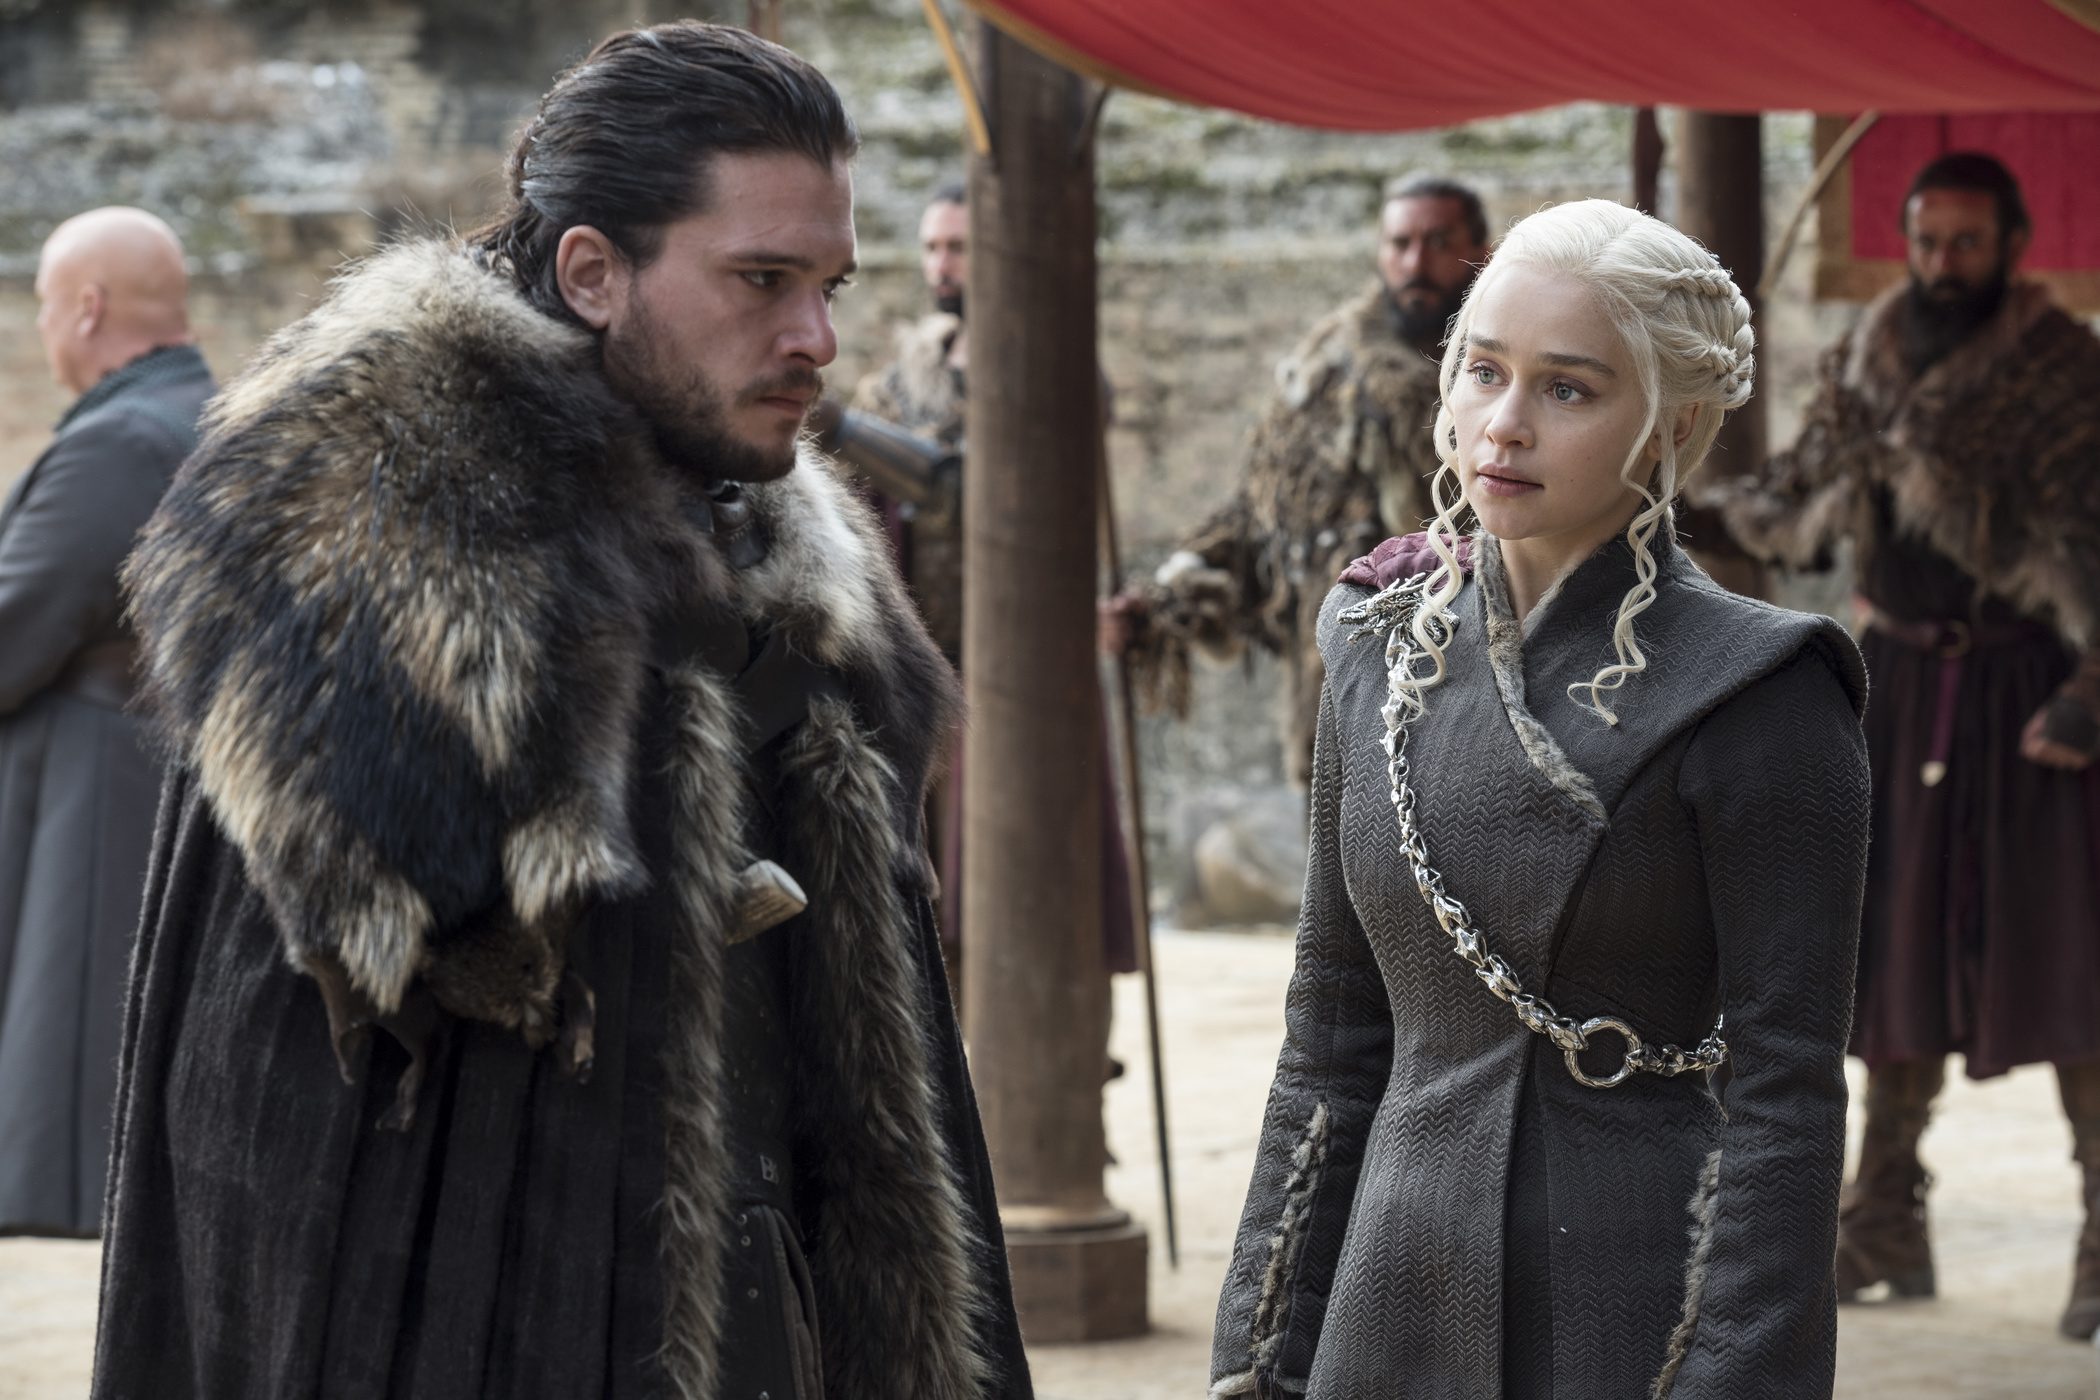 WATCH: HBO releases ‘Game of Thrones’ behind-the-scenes series